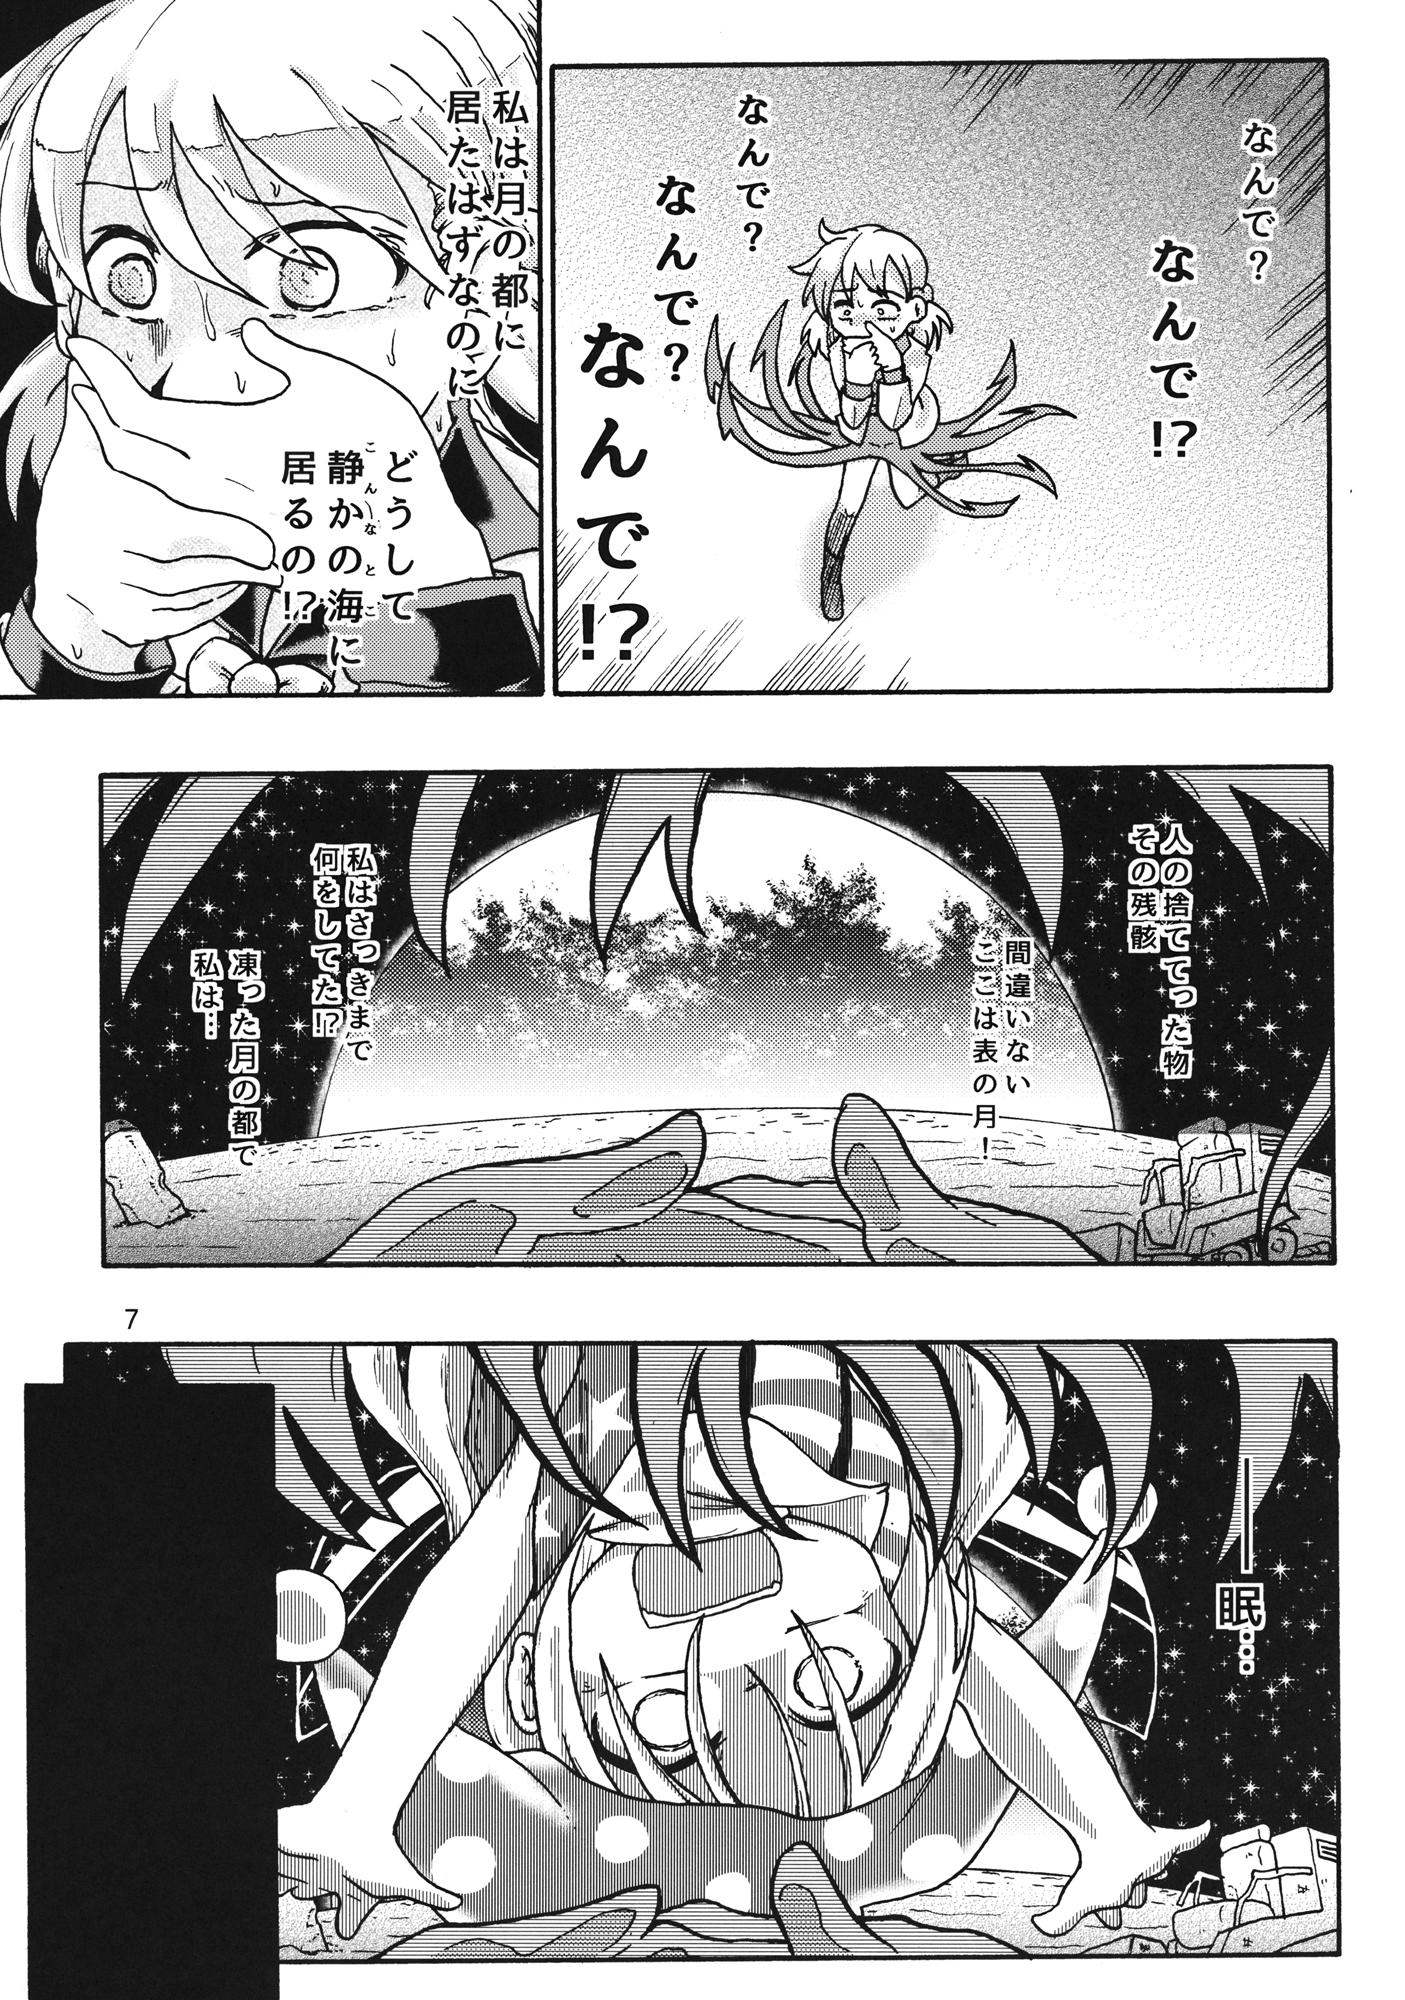 Workout Creeping! - Touhou project 4some - Page 6